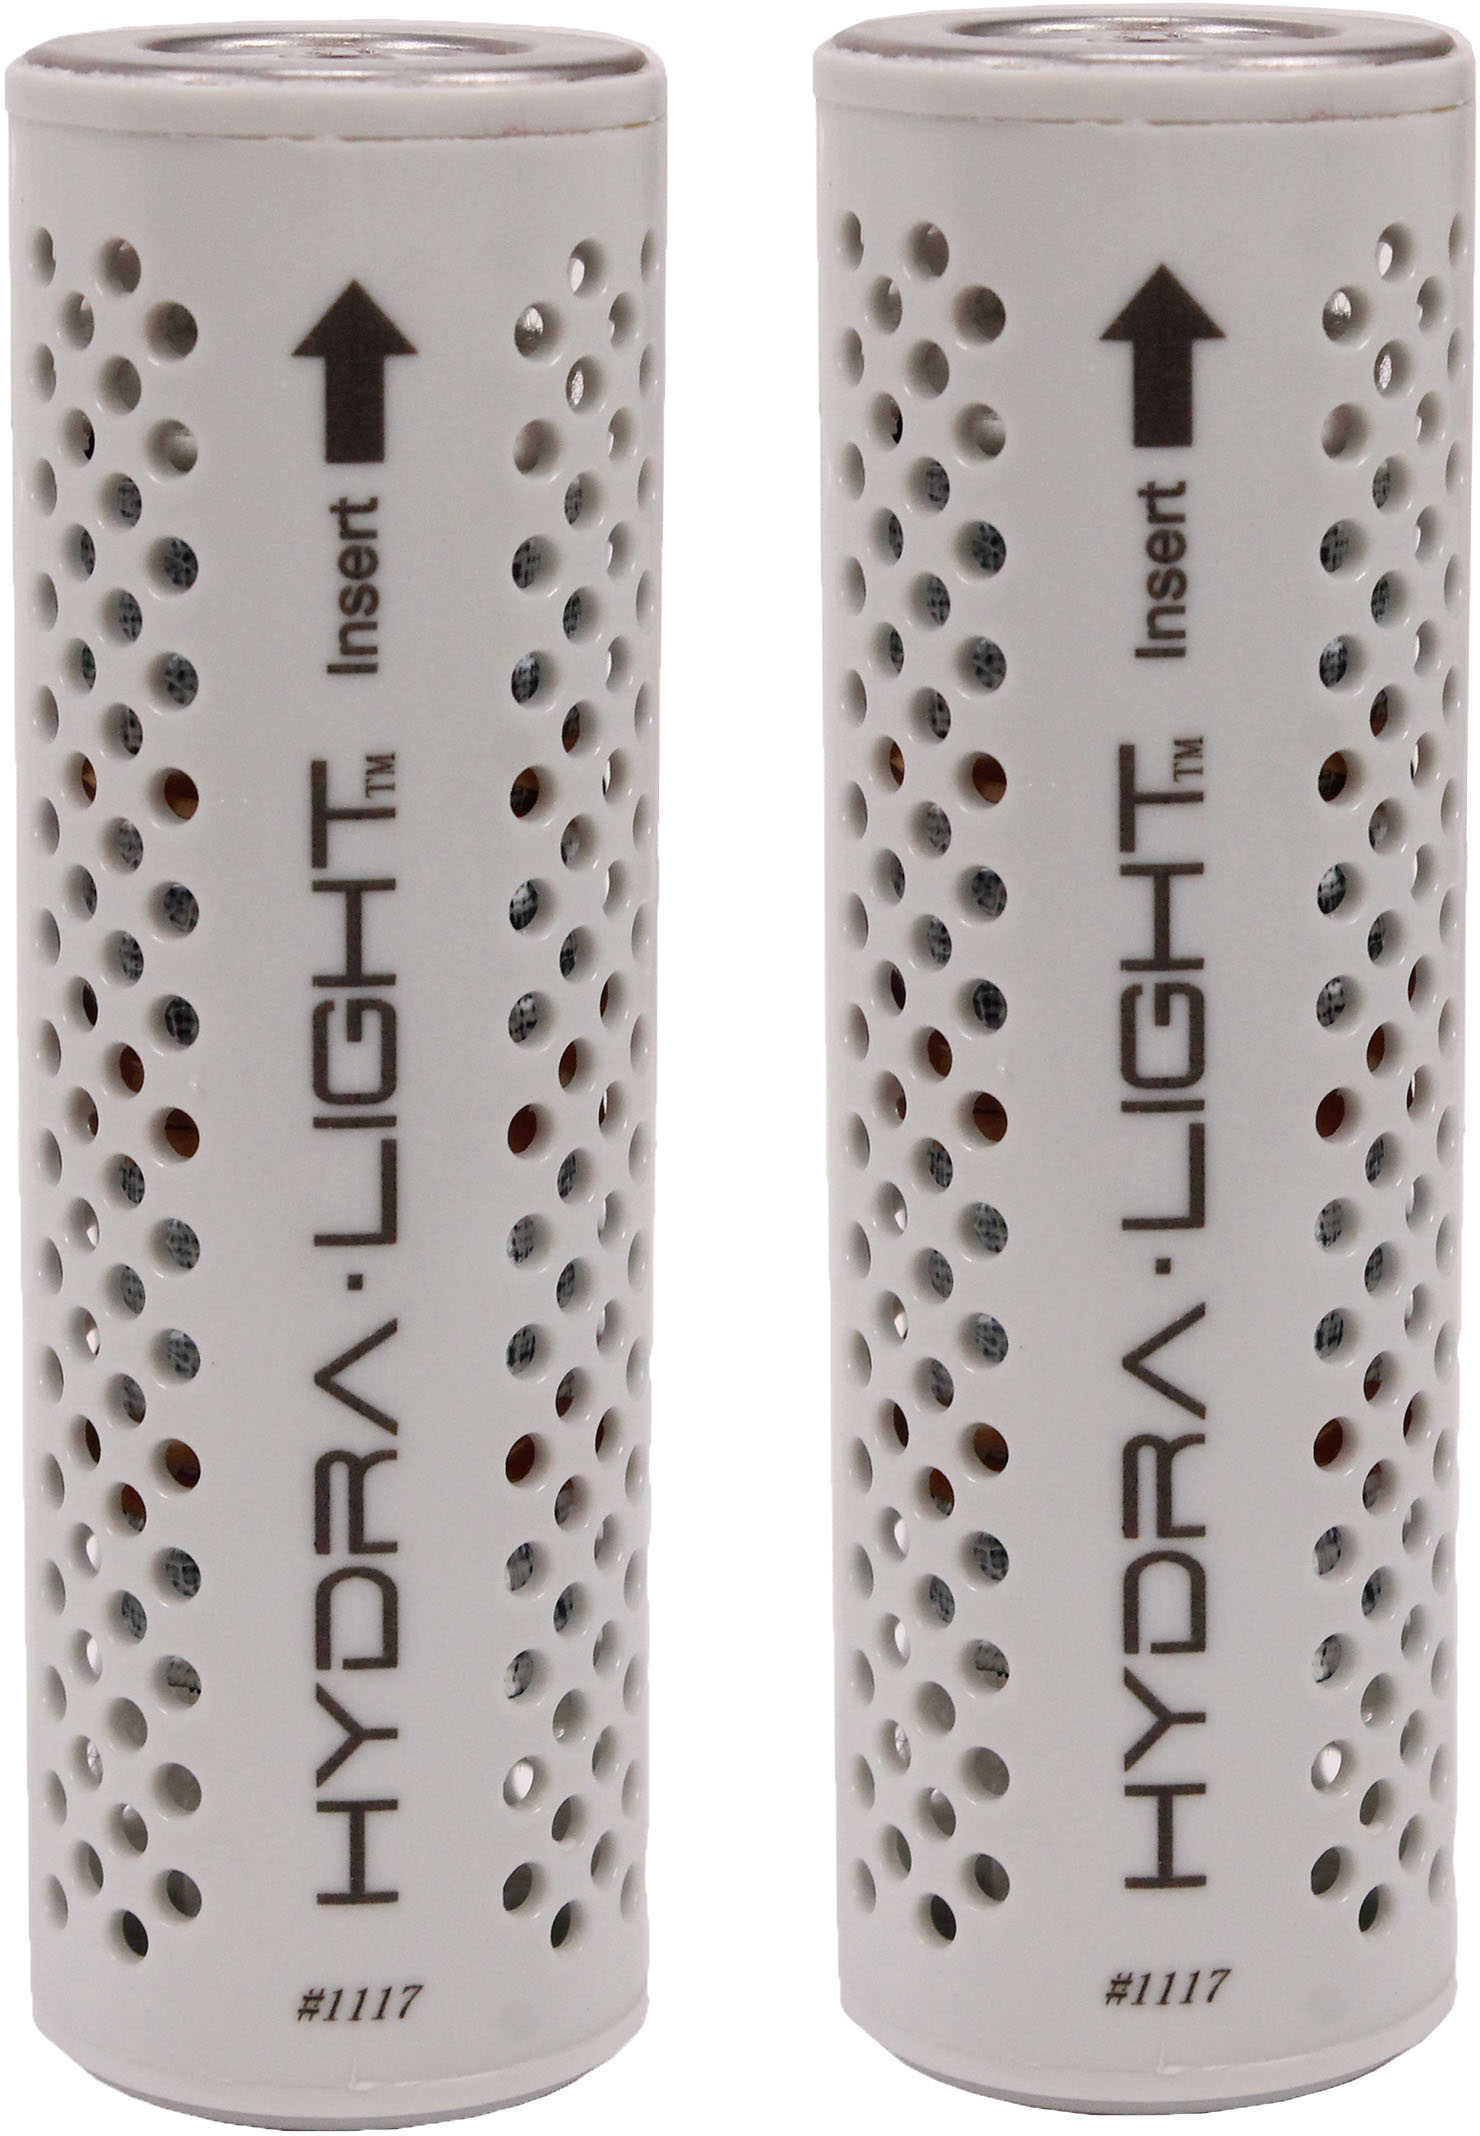 Hydra Light Replacement Cell Flashlight, Package of 2